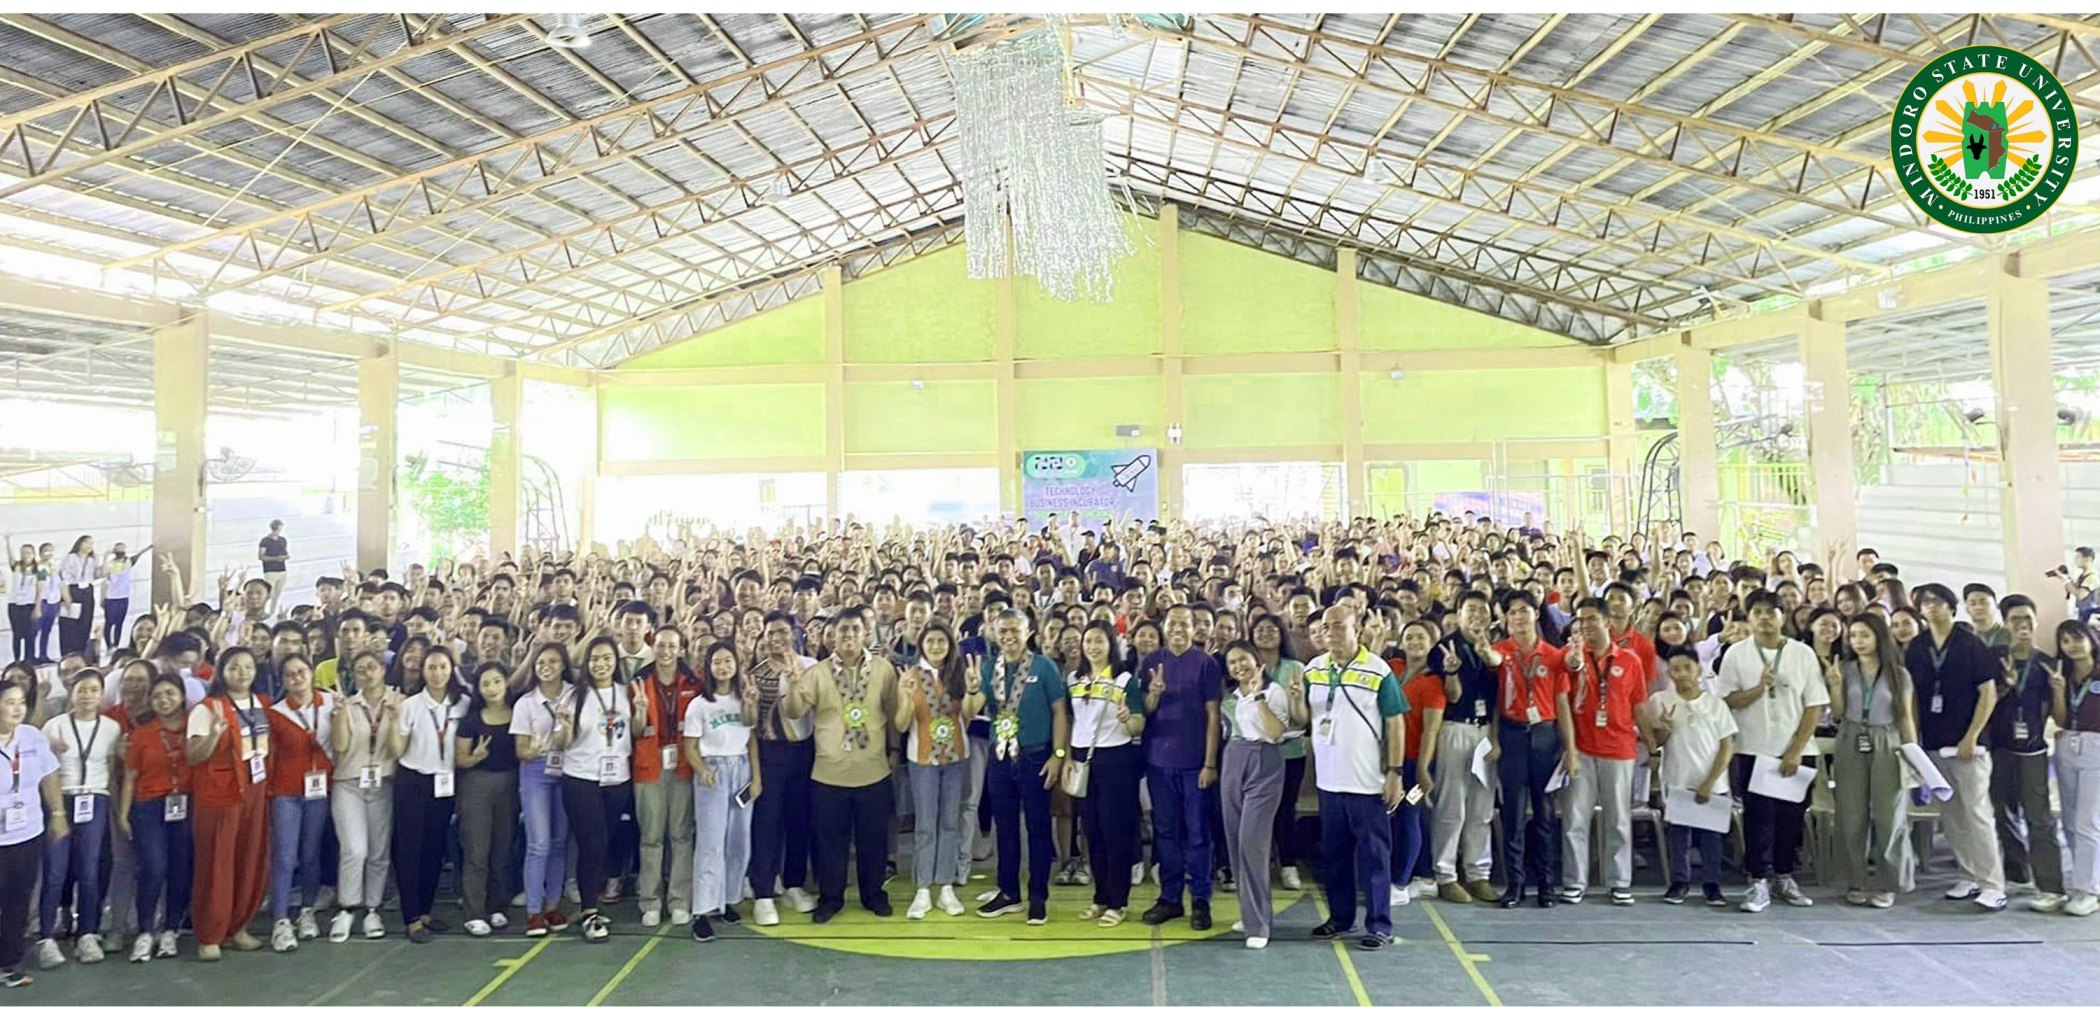 Sen. Imee Marcos Visits MinSU; Leads Distribution of Cash Aid Assistance to 1,000 MinSU Students